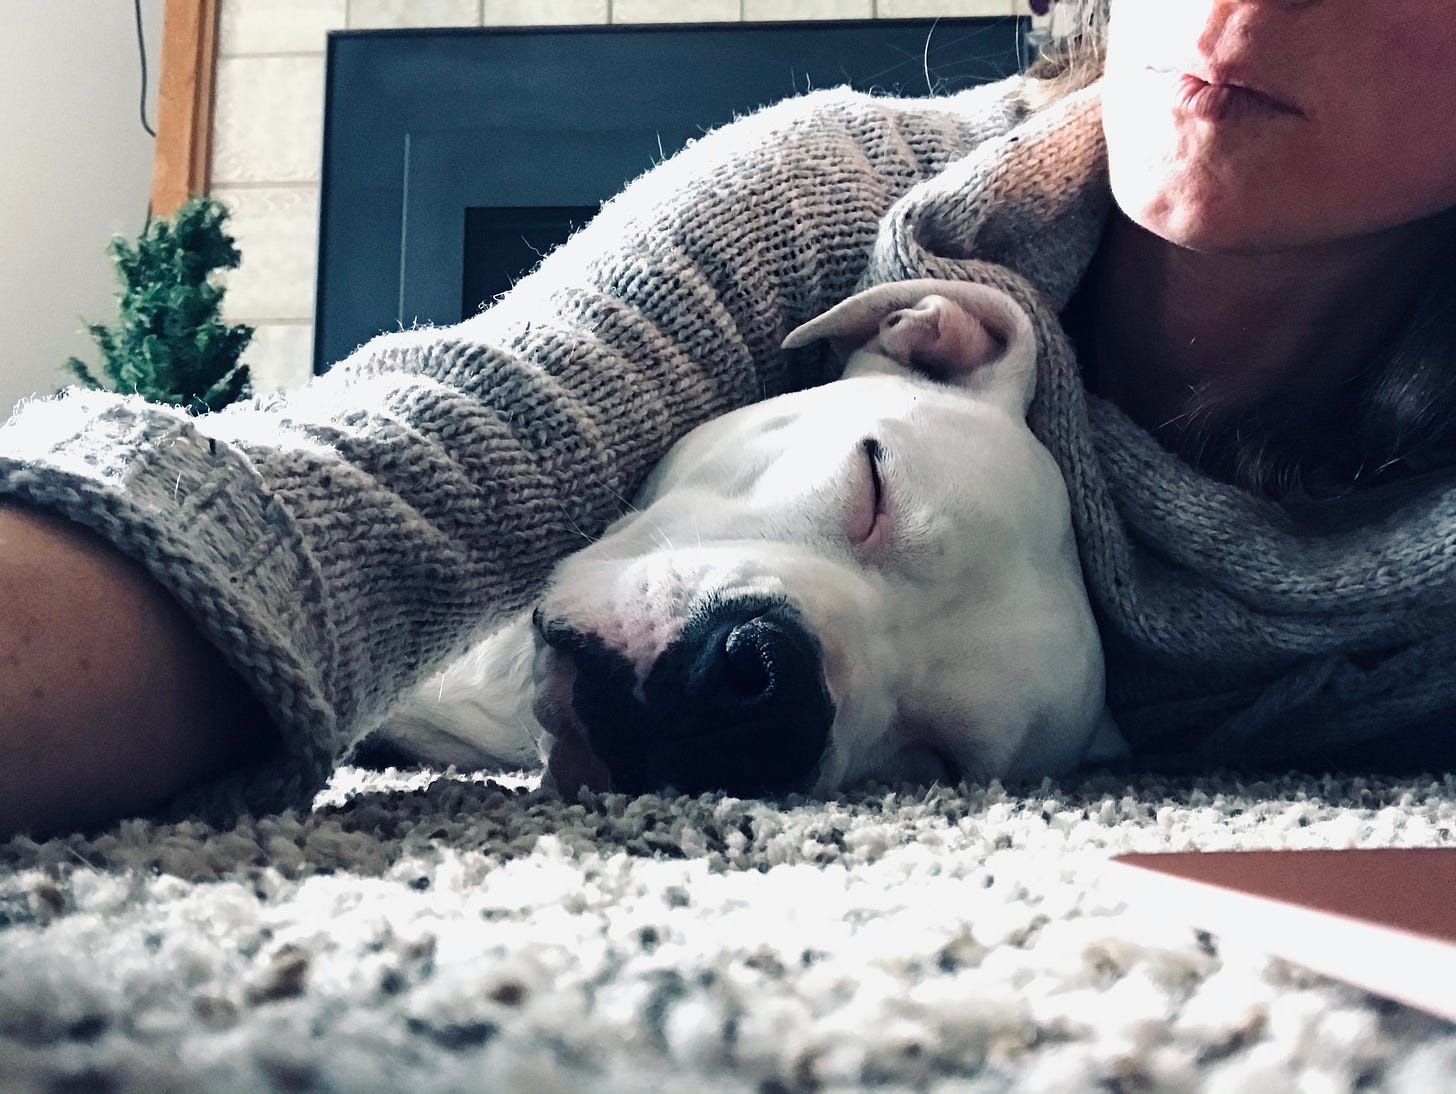 kari takes a selfie with Bitty, the white pit bull who sleeps under her armpit